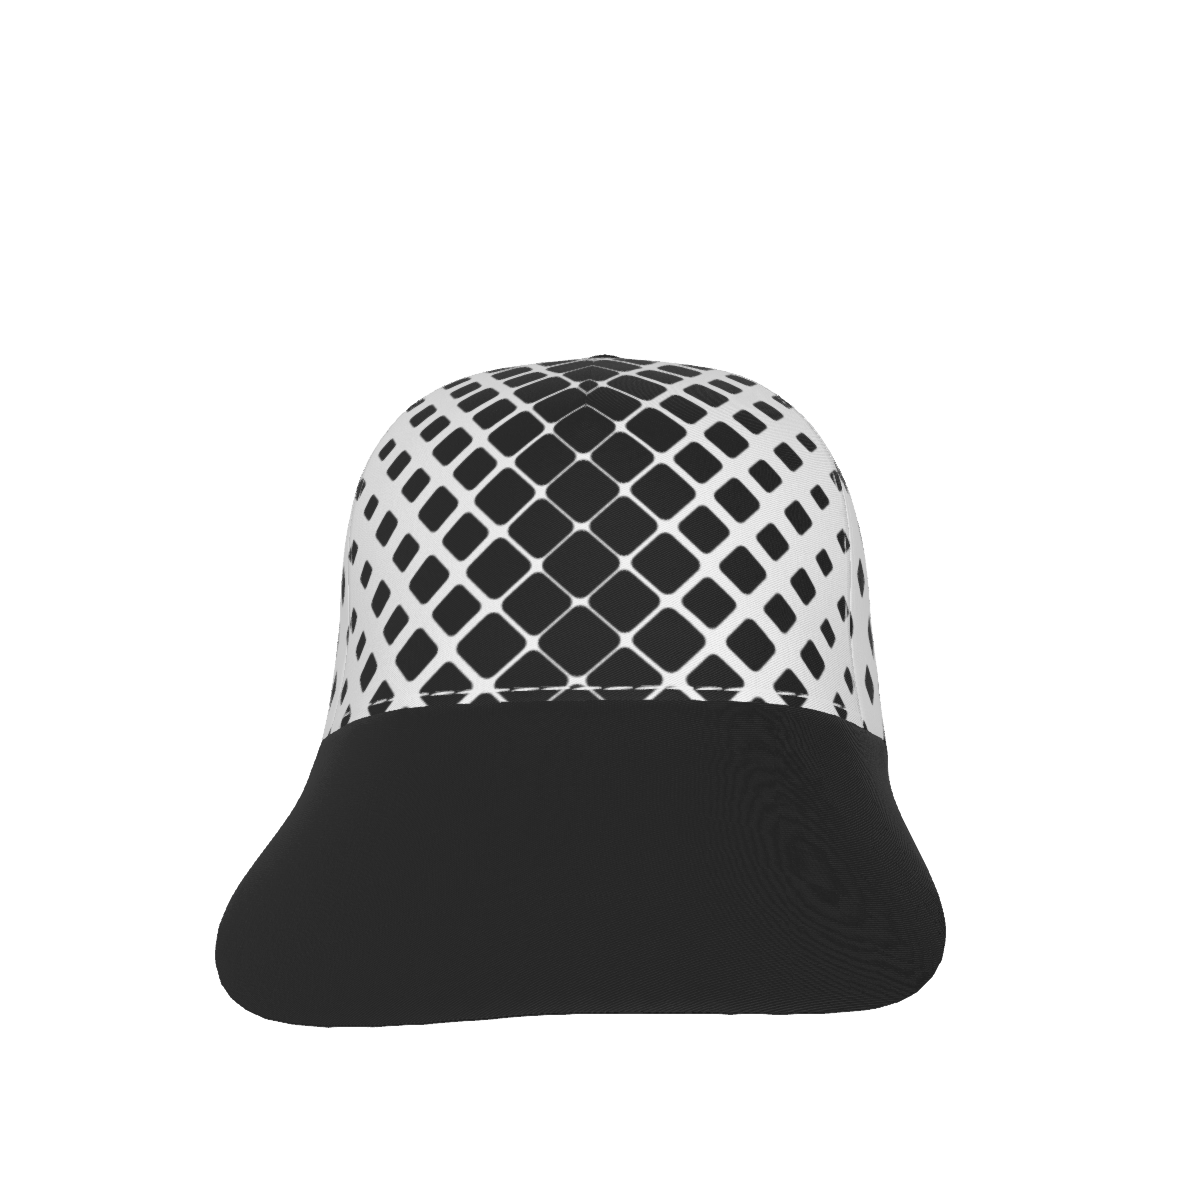 Black And White 90 with Black Peaked Cap - DromedarShop.com Online Boutique